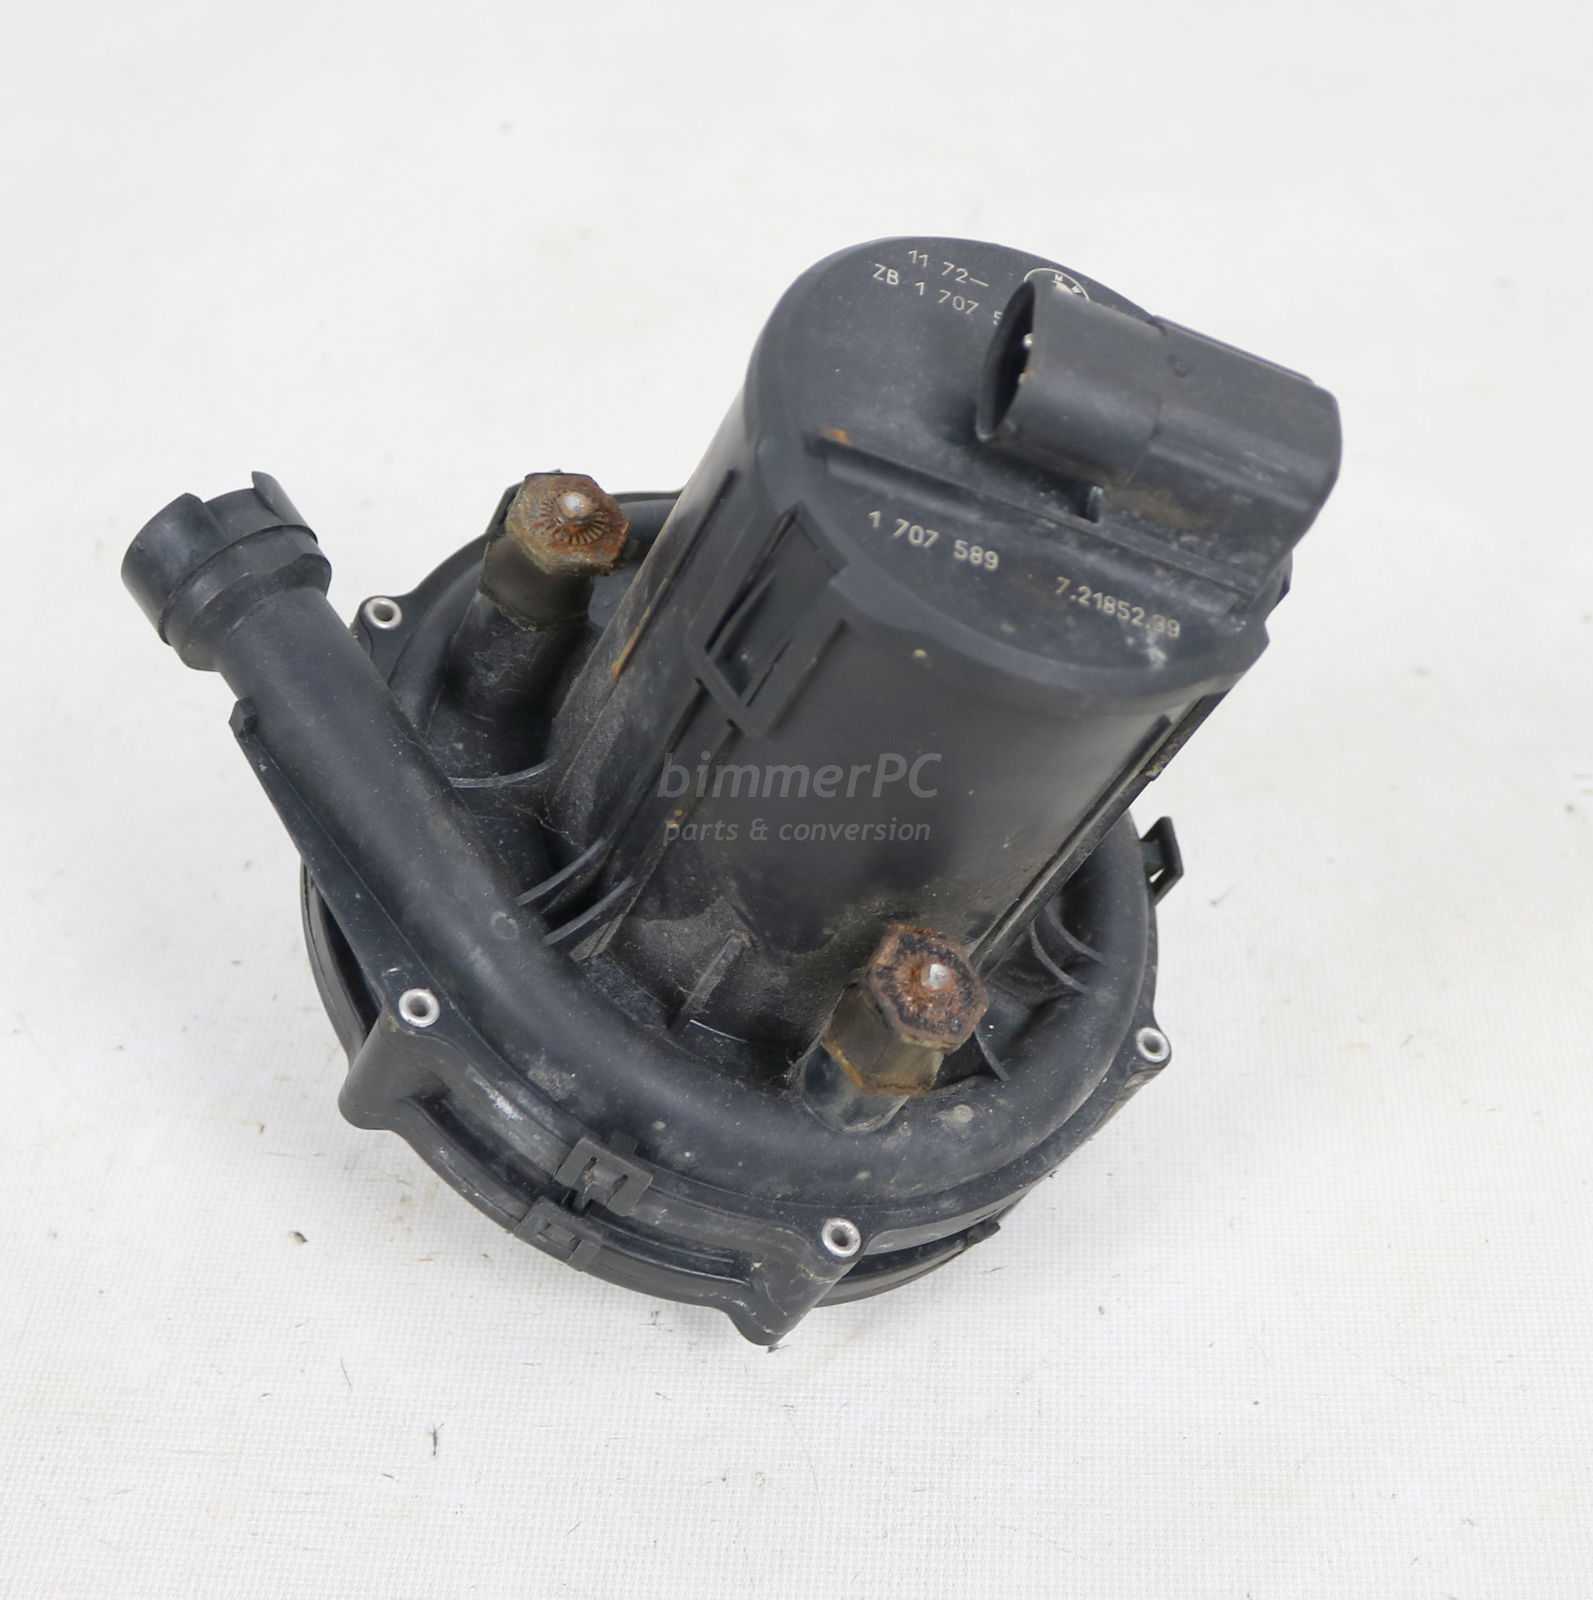 Picture of BMW 11721707585 Secondary Air Injection Emissions Smog Pump E38 740iL 740i M62tu for sale